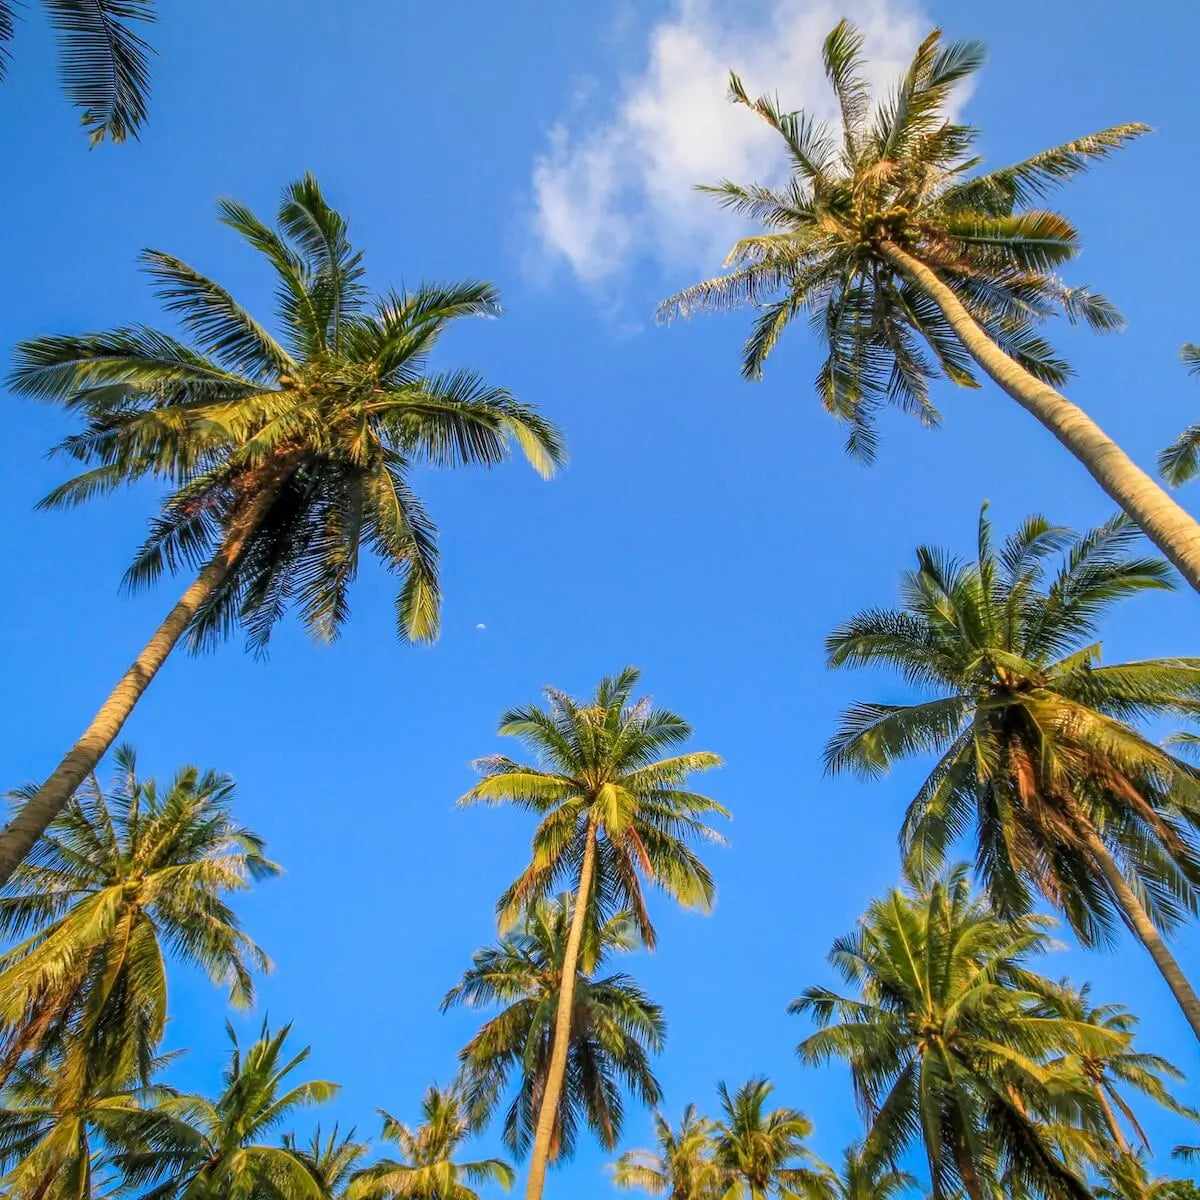 Looking up at some large ripe palm trees with the deep blue sky in the background.